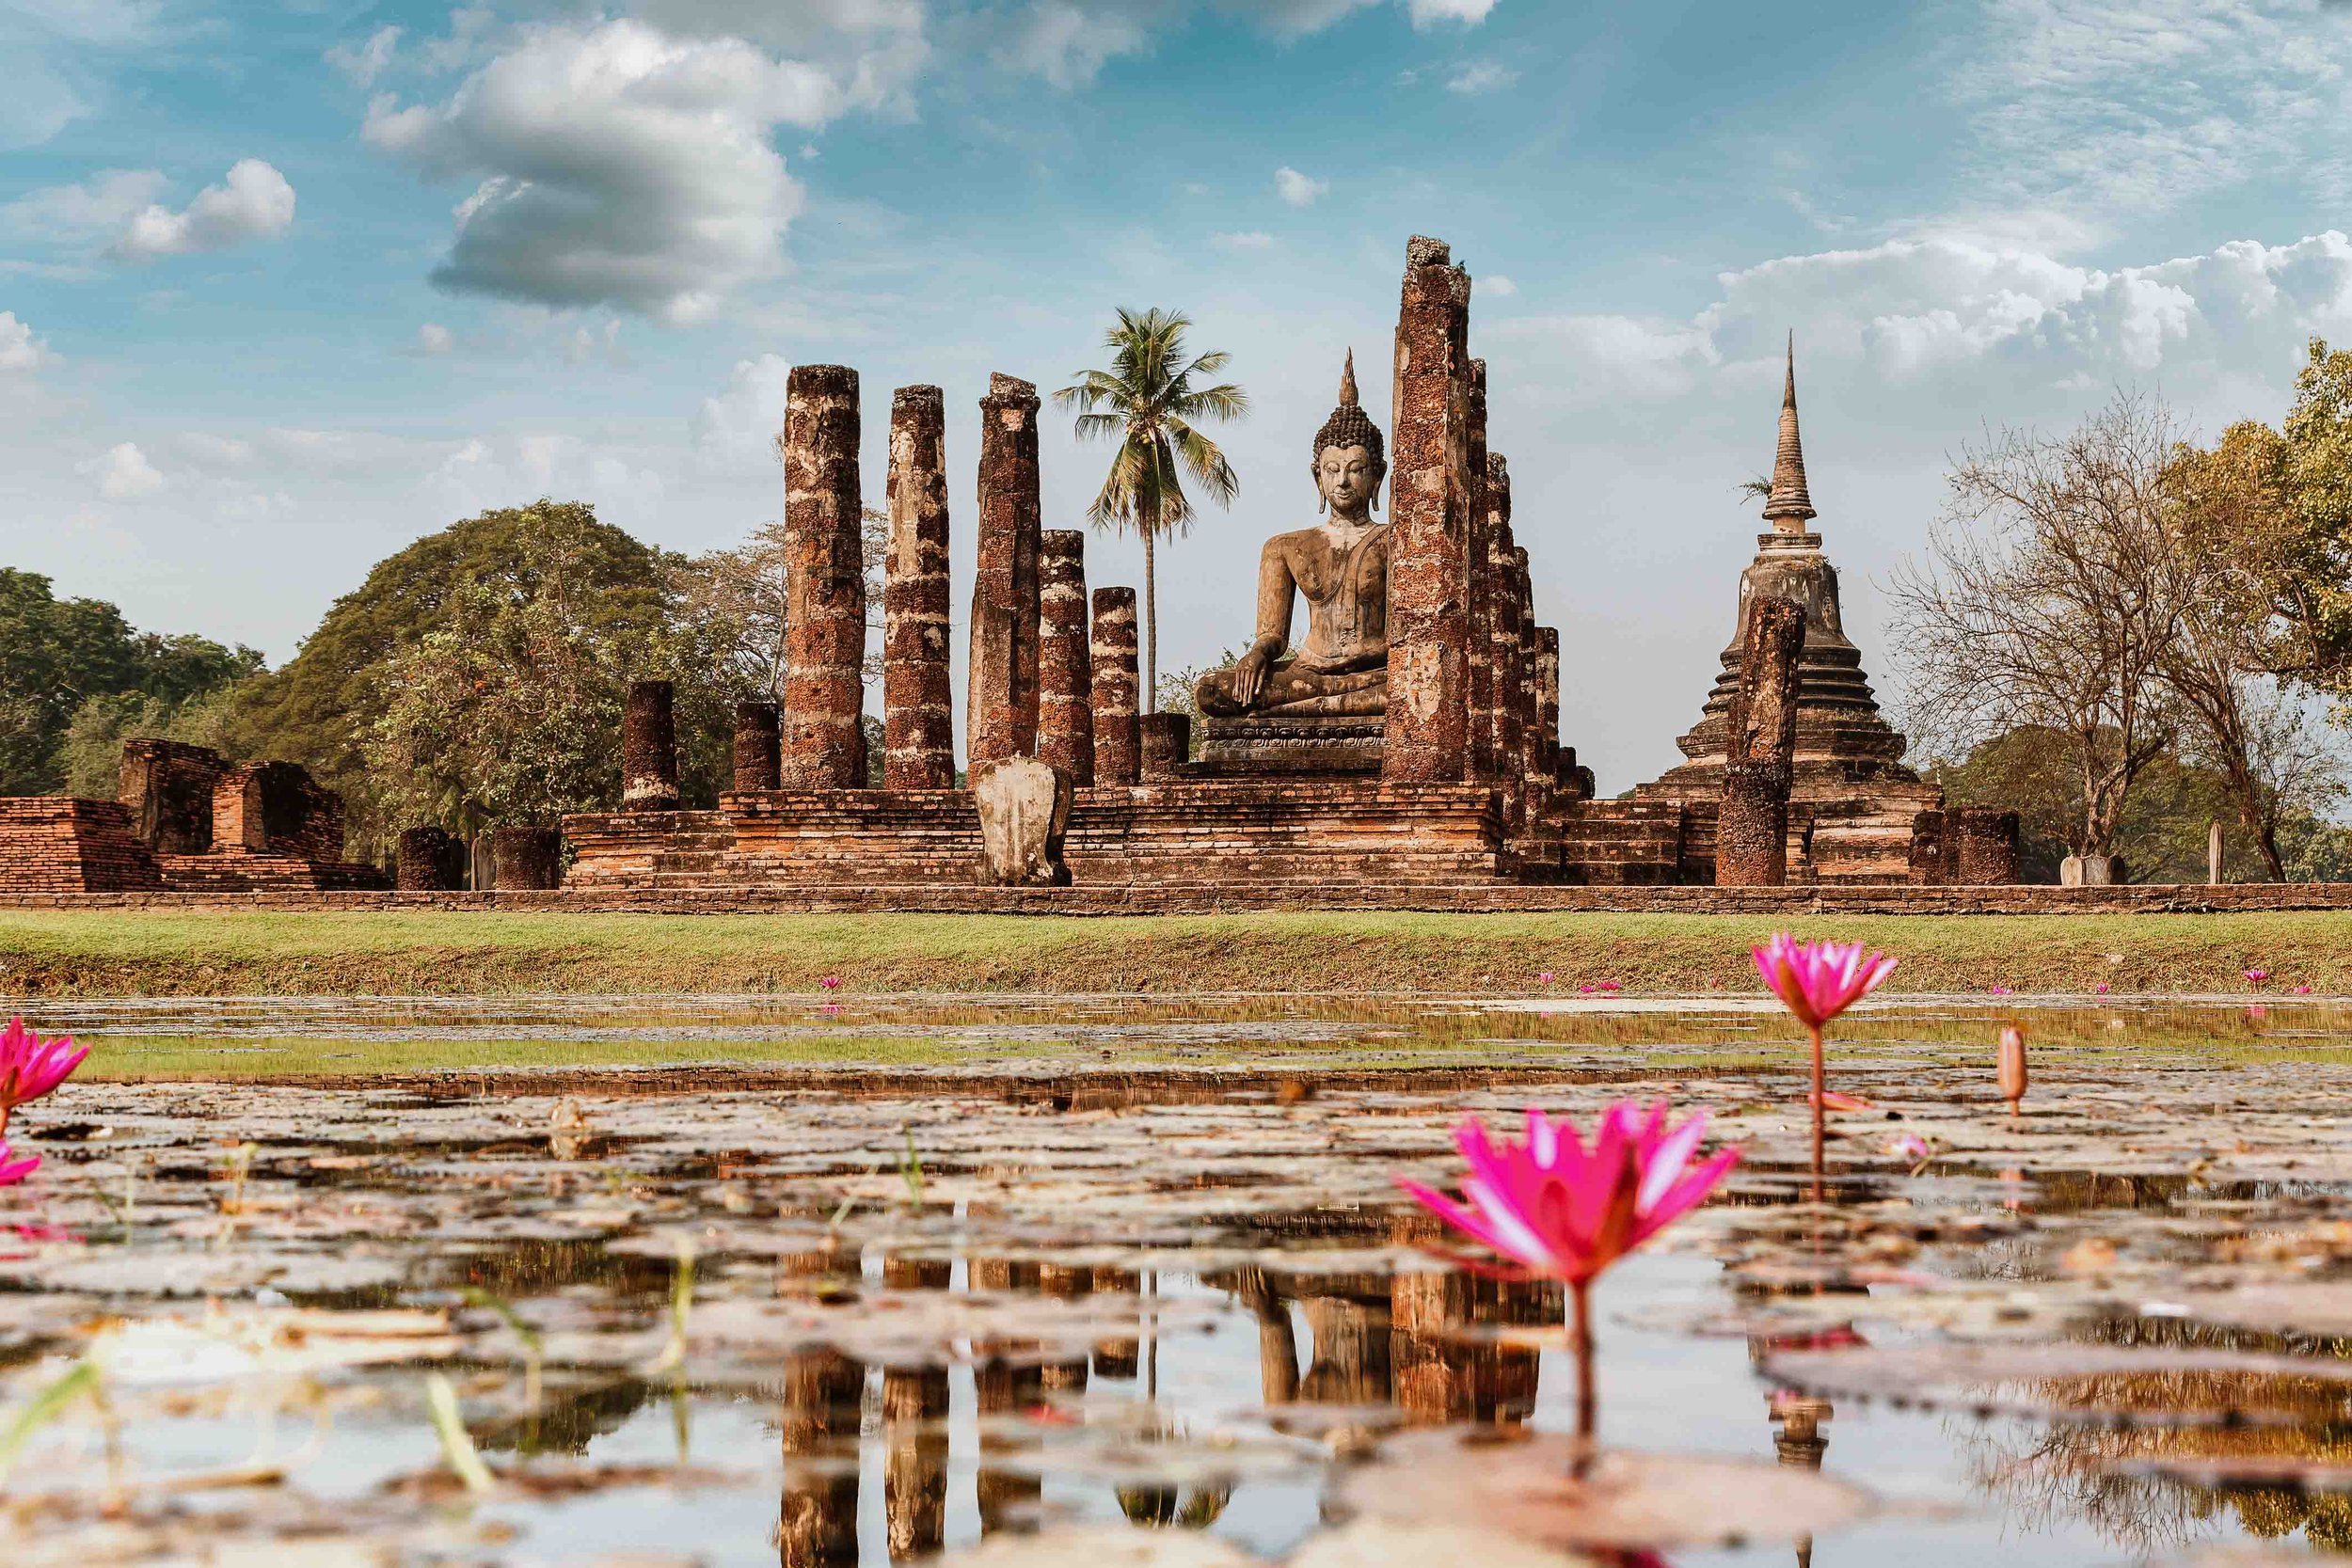 Sukhothai national park temple with lotuses in pond on Thailand 1 month itinerary